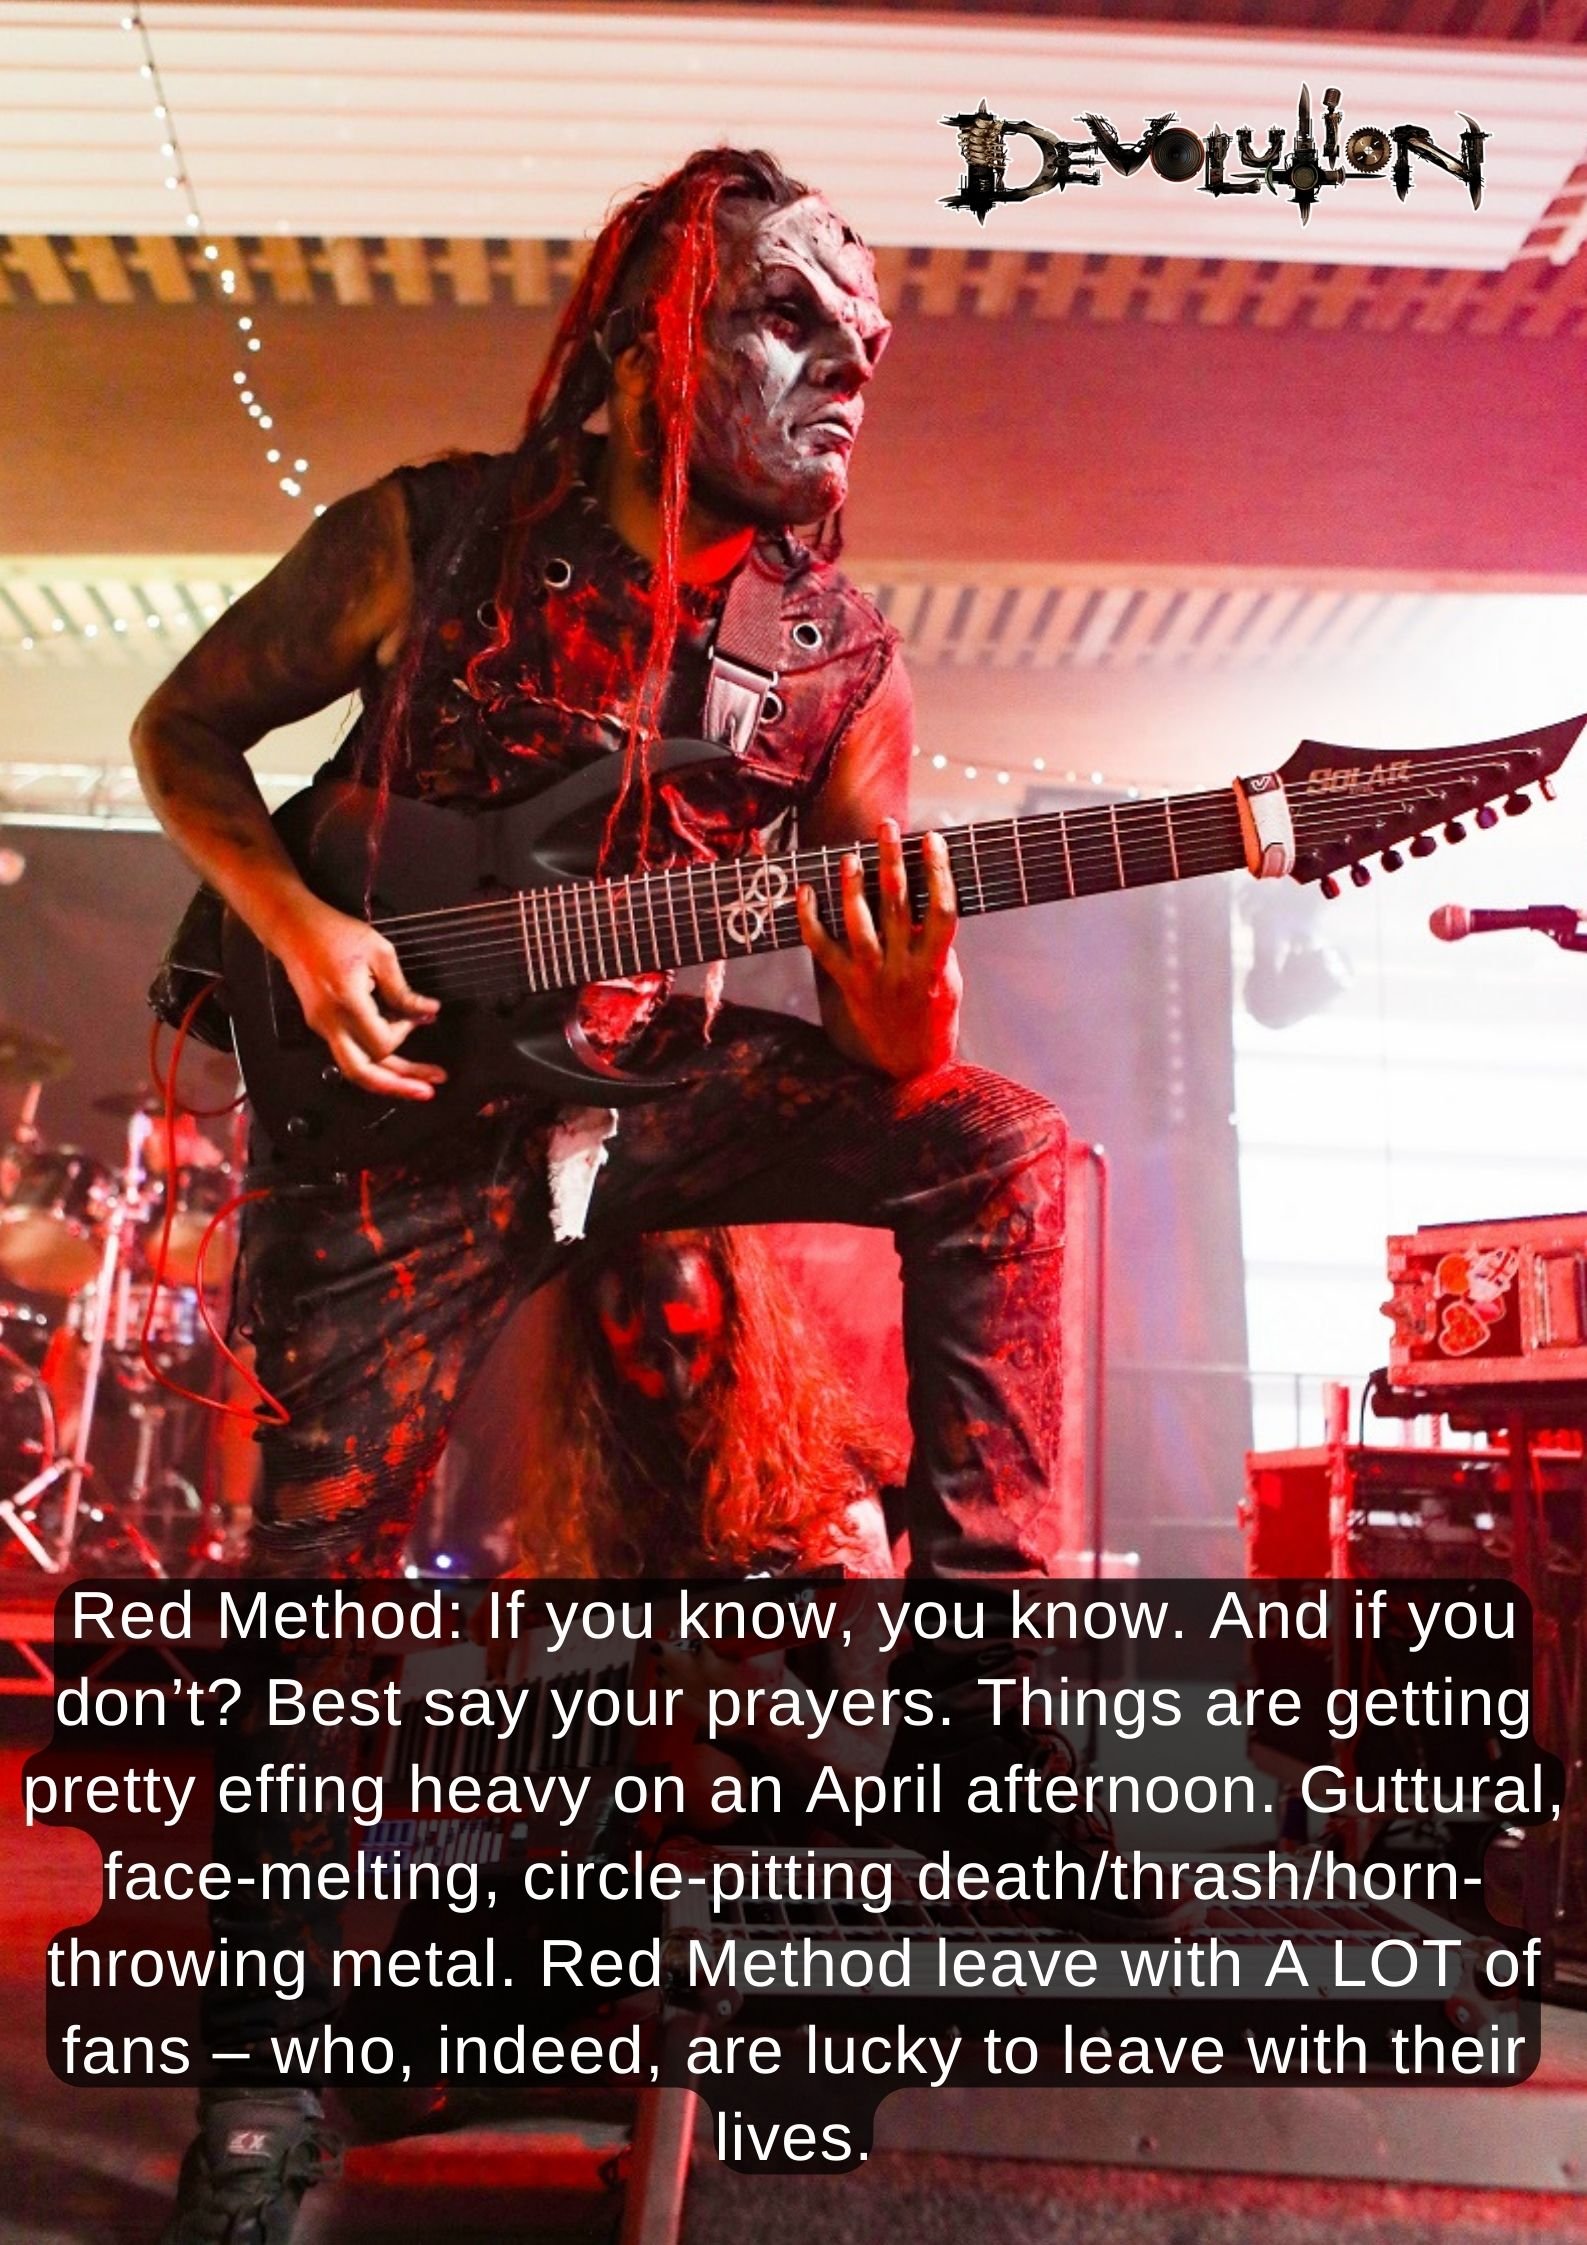 Red Method If you know, you know. And if you don’t Best say your prayers. Things are getting pretty effing heavy on an April afternoon. Guttural, face-melting, circle-pitting deaththrashhorn-throwing metal. Red Metho.jpg